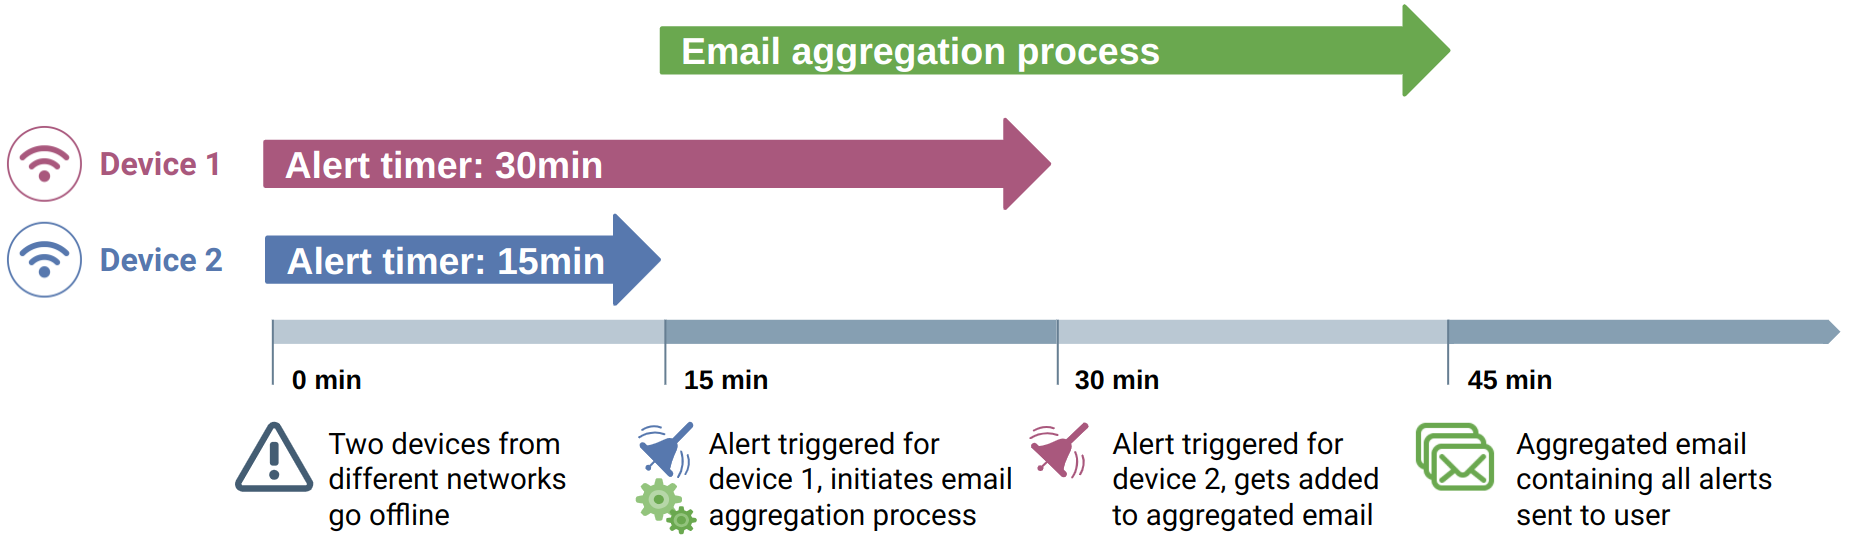 email-aggregation-process.png